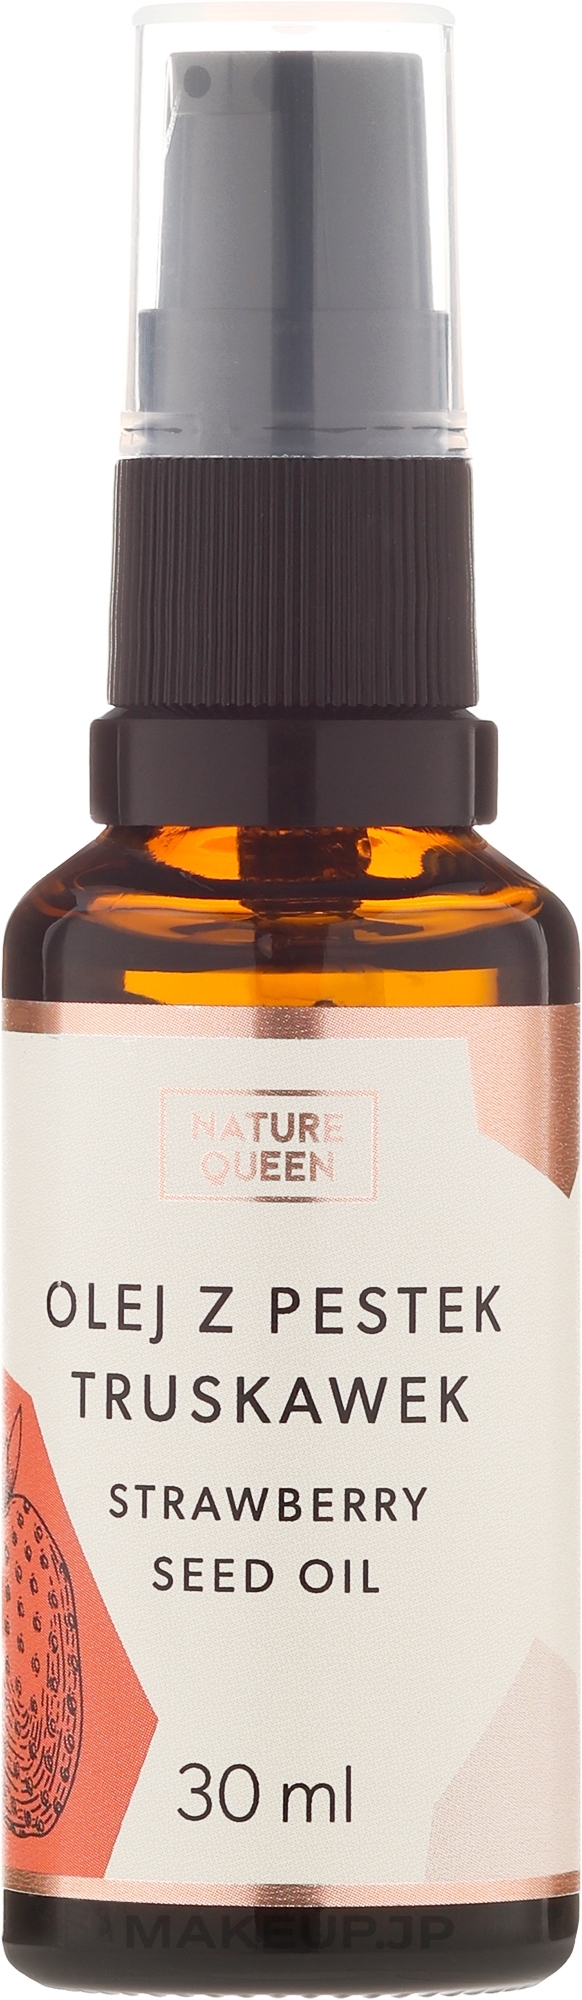 Strawberry Oil - Nature Queen Strawberry Seed Oil — photo 30 ml